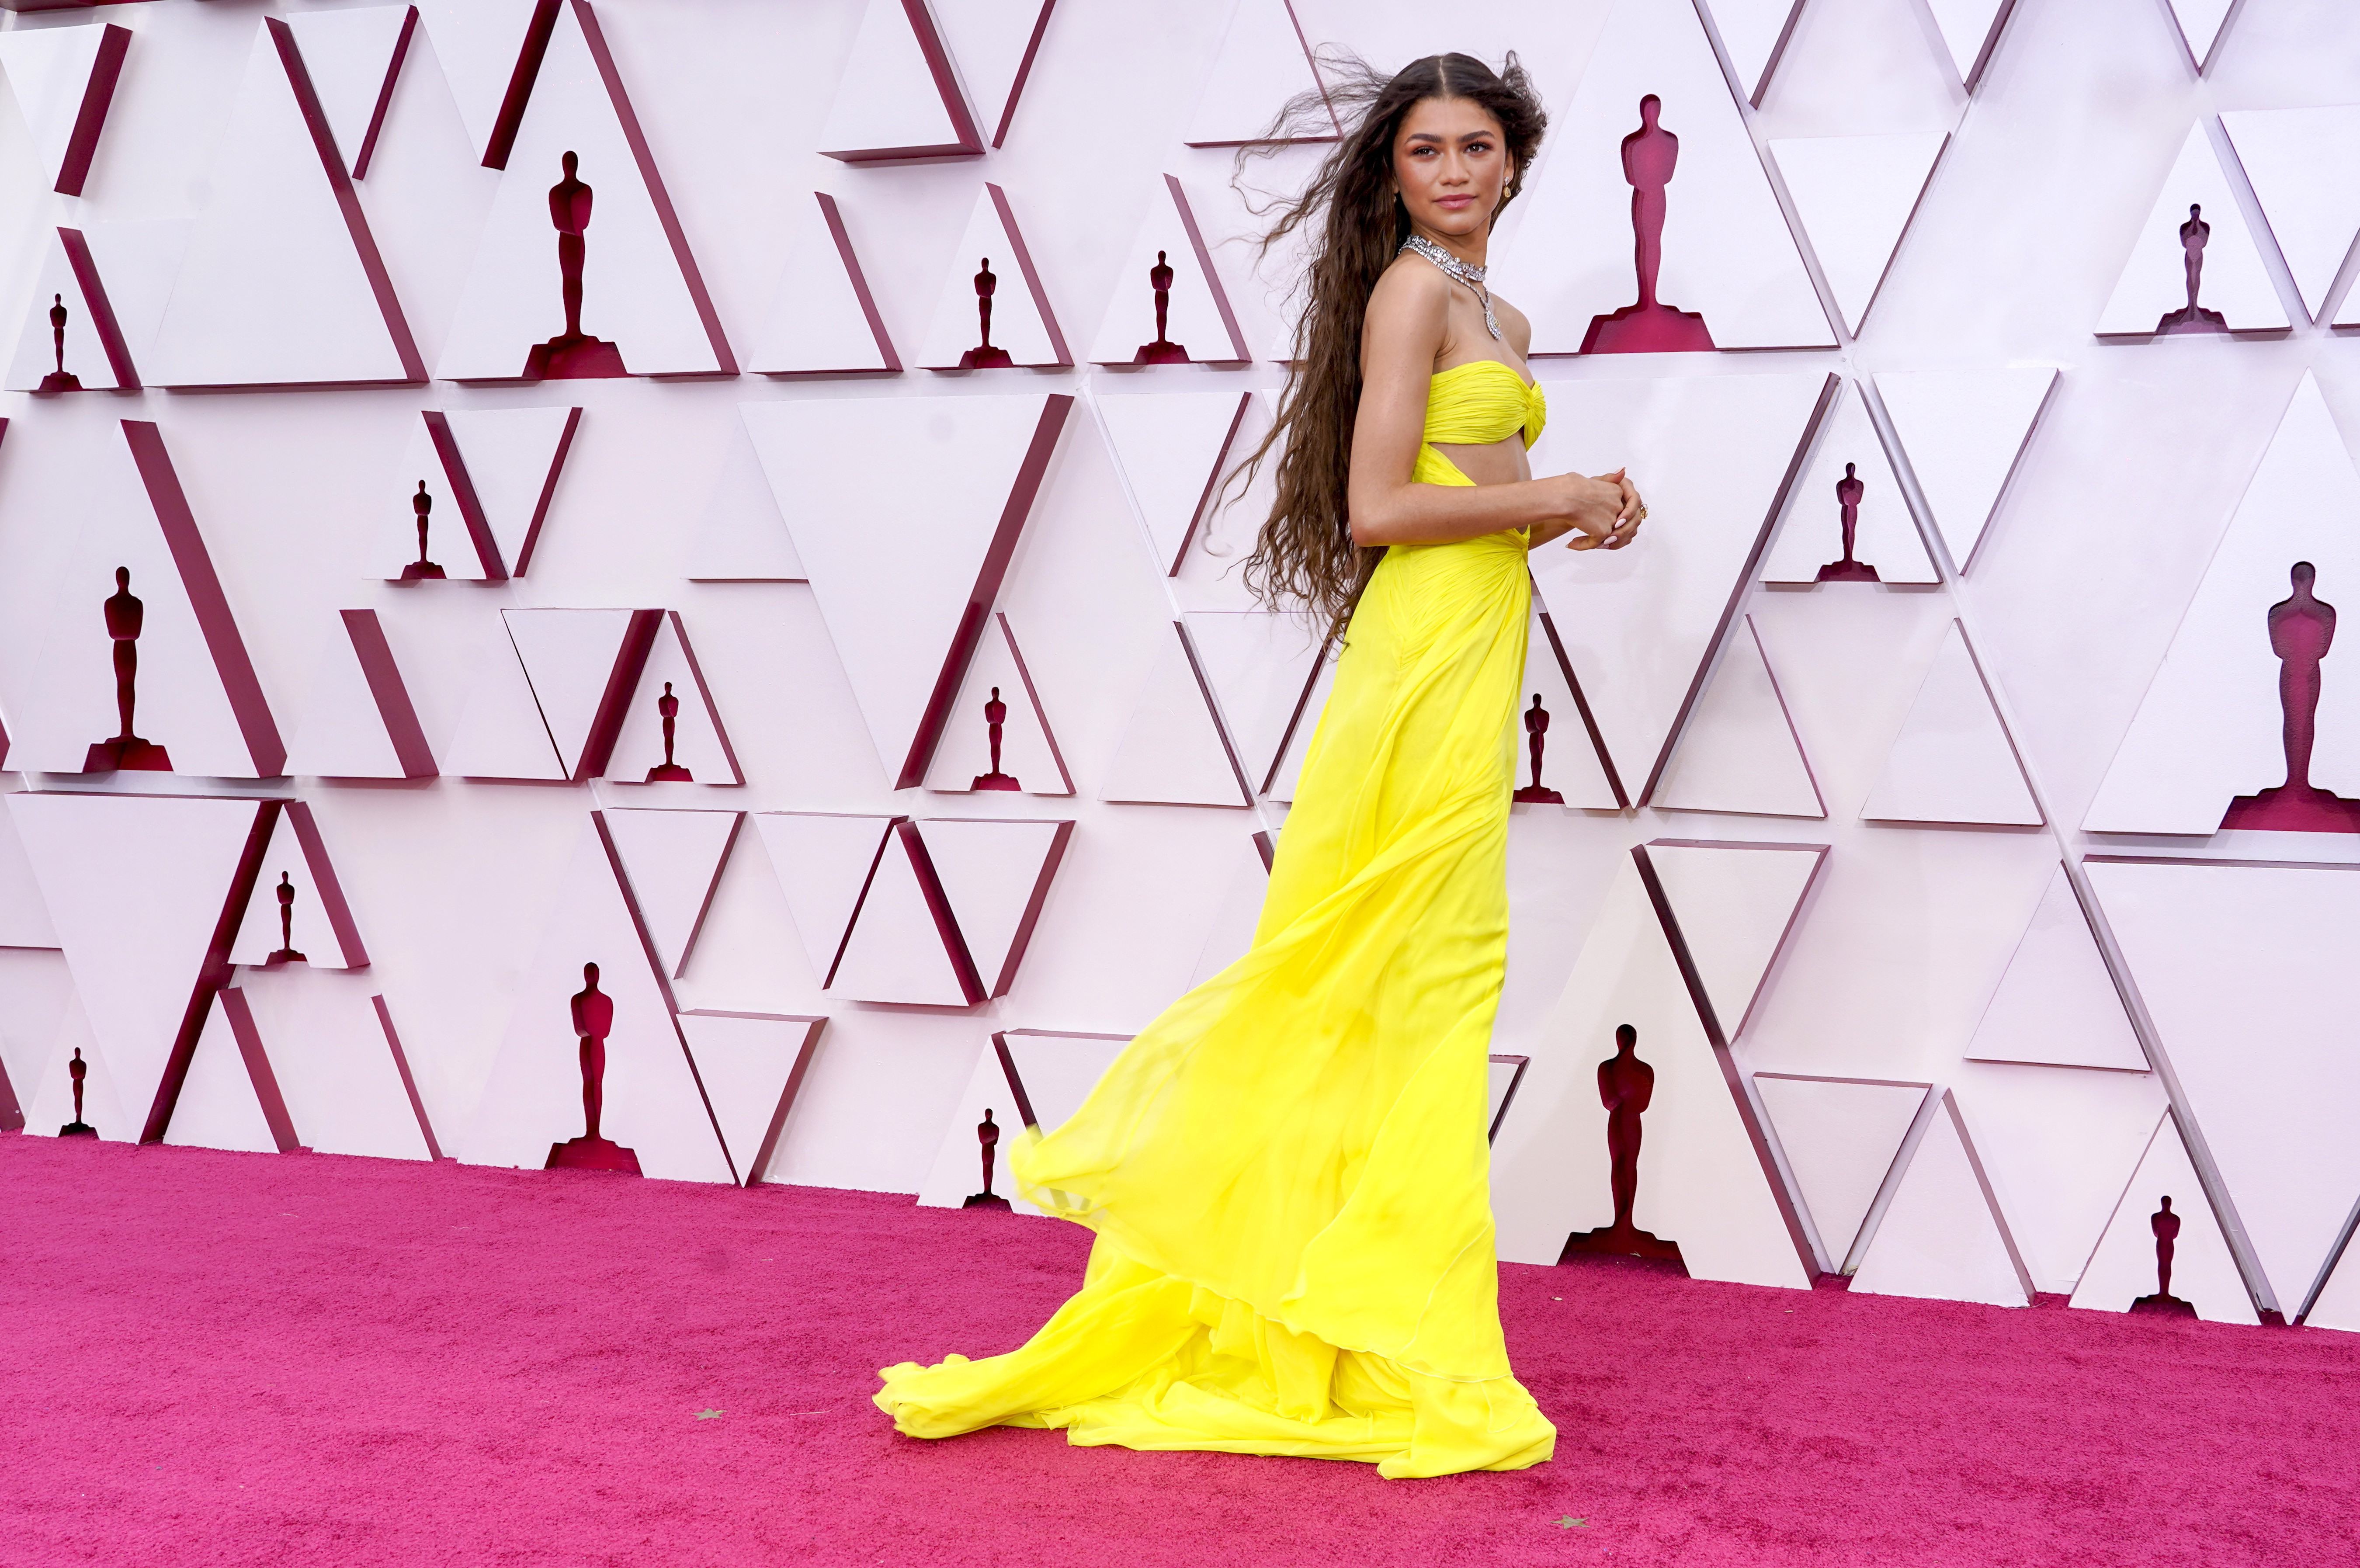 LOS ANGELES, CALIFORNIA – APRIL 25: Zendaya attends the 93rd Annual Academy Awards at Union Station on April 25, 2021 in Los Angeles, California. (Photo by Chris Pizzello-Pool/Getty Images) (Foto: Getty Images)